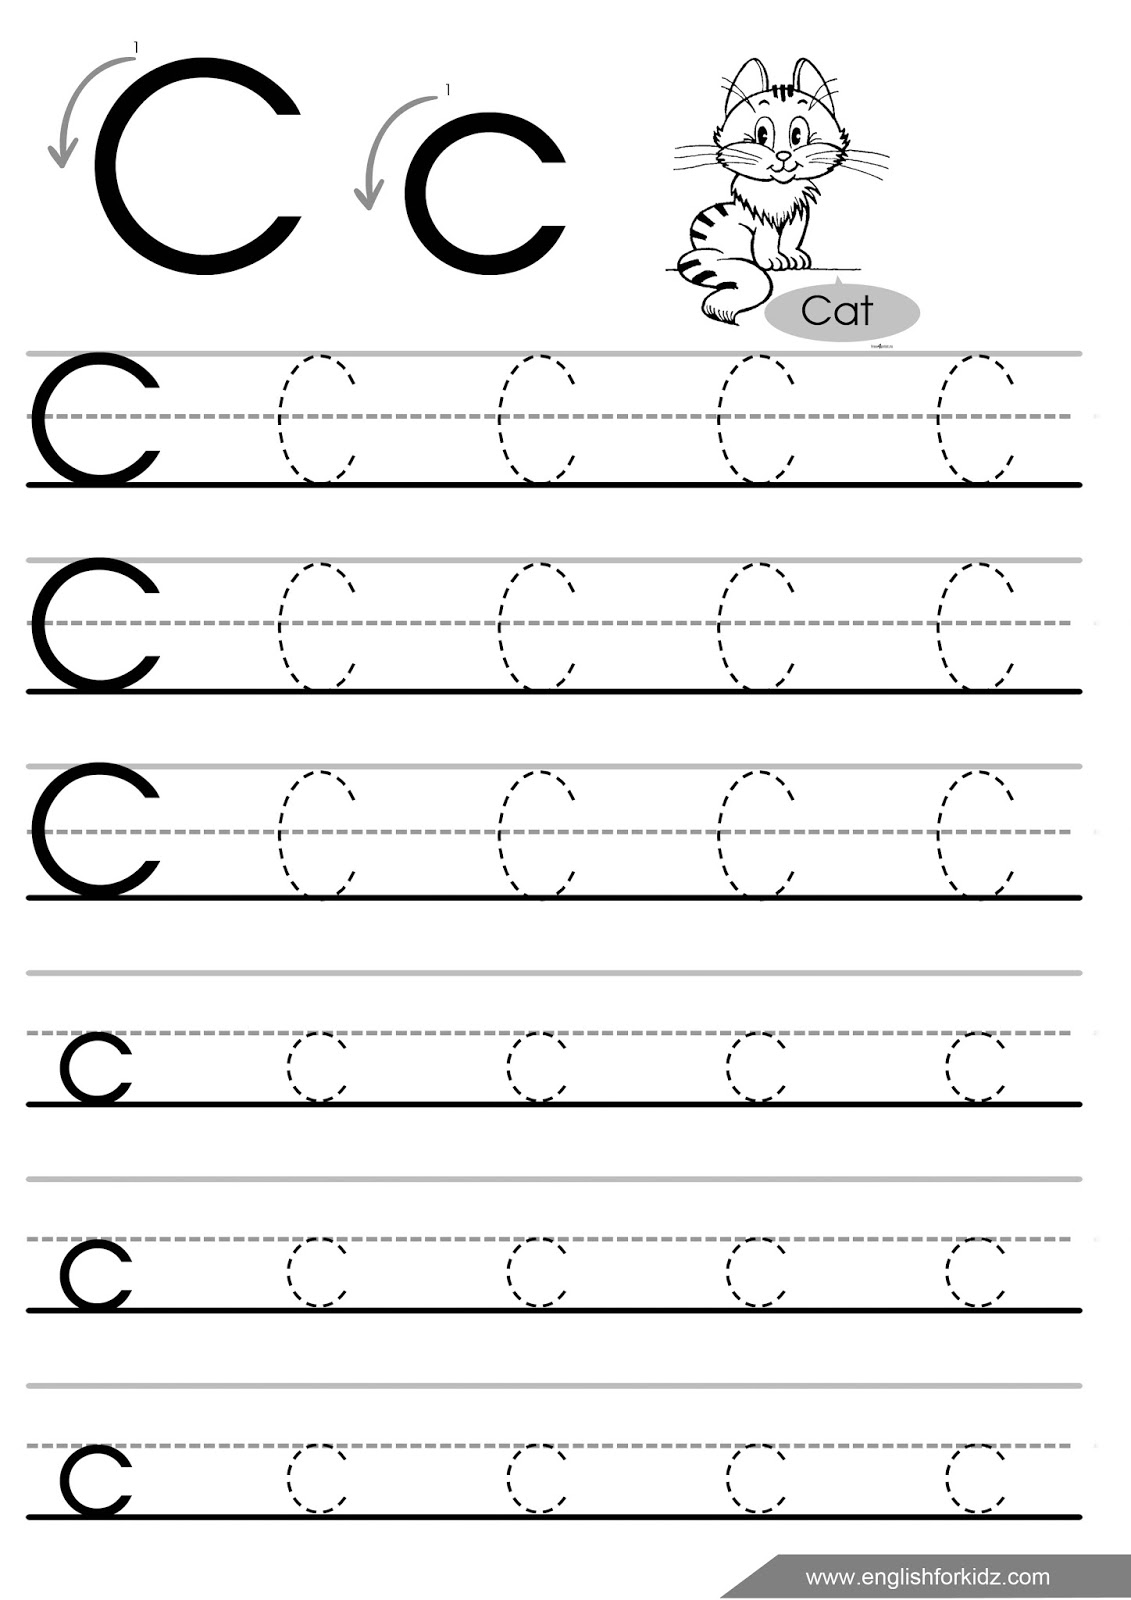 Letter Tracing Worksheets Letters Trace The Worksheet Free regarding Letter C Tracing Sheet